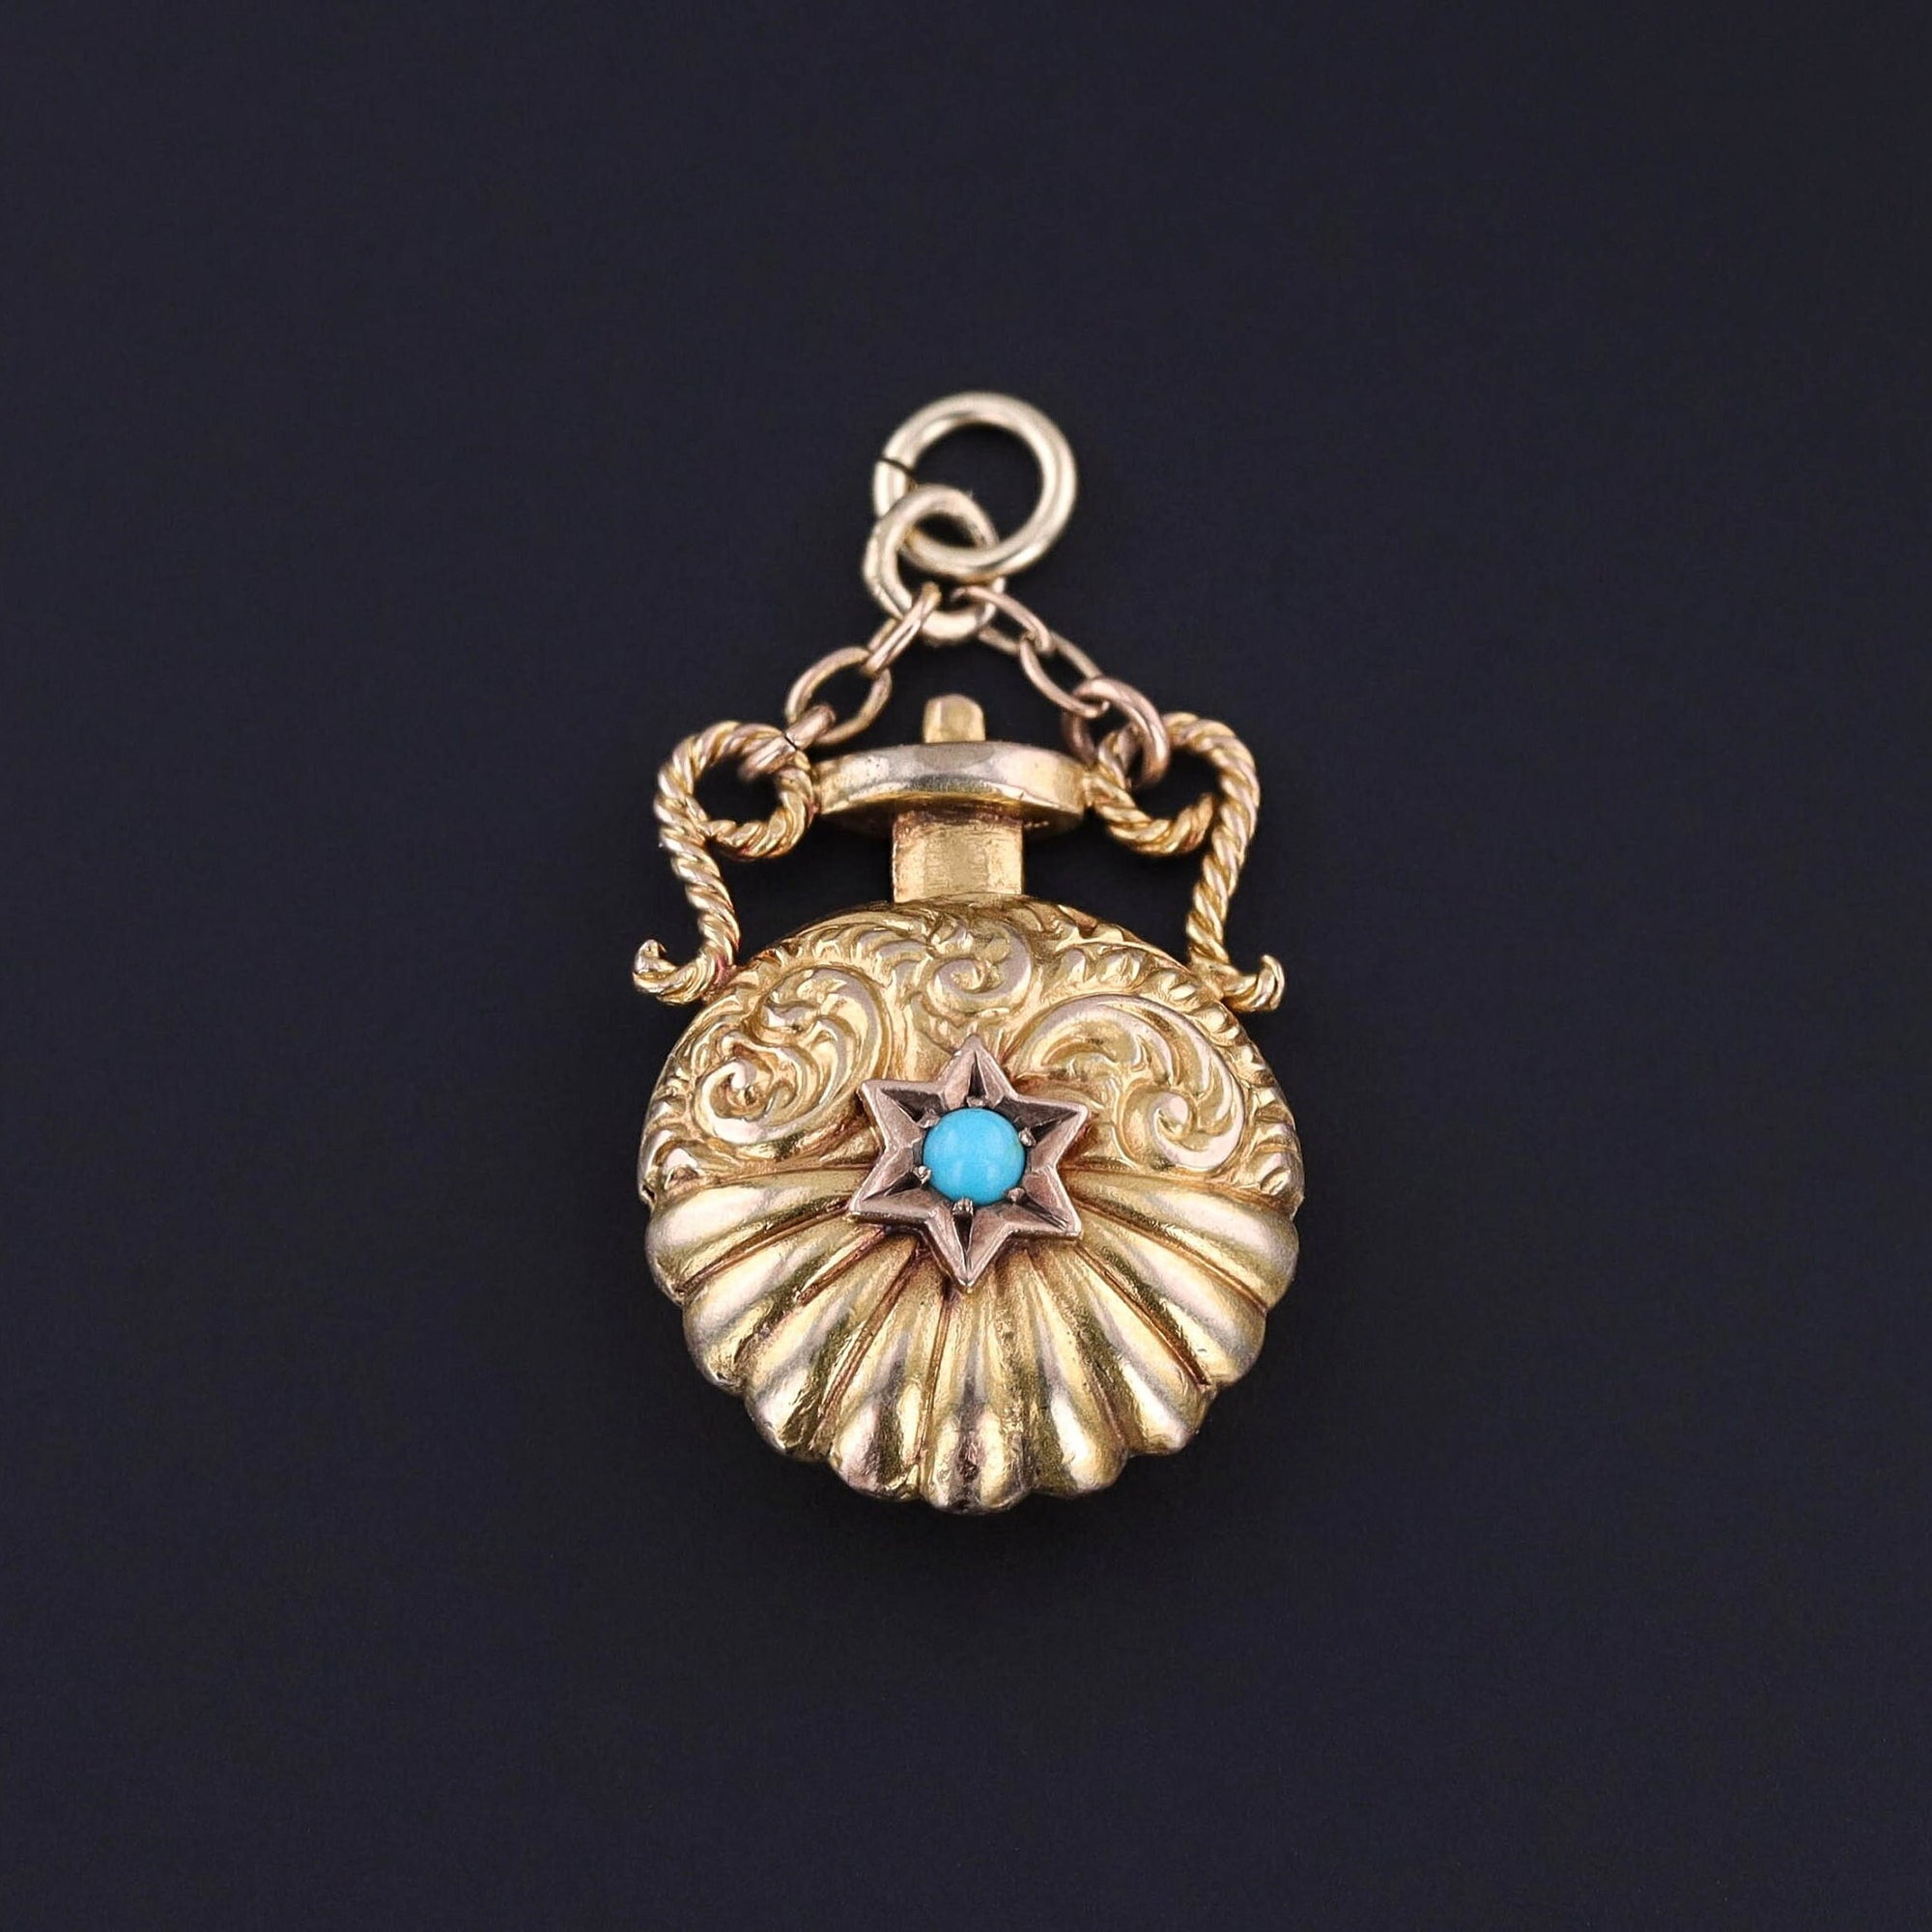 Antique Charm of 10k Gold